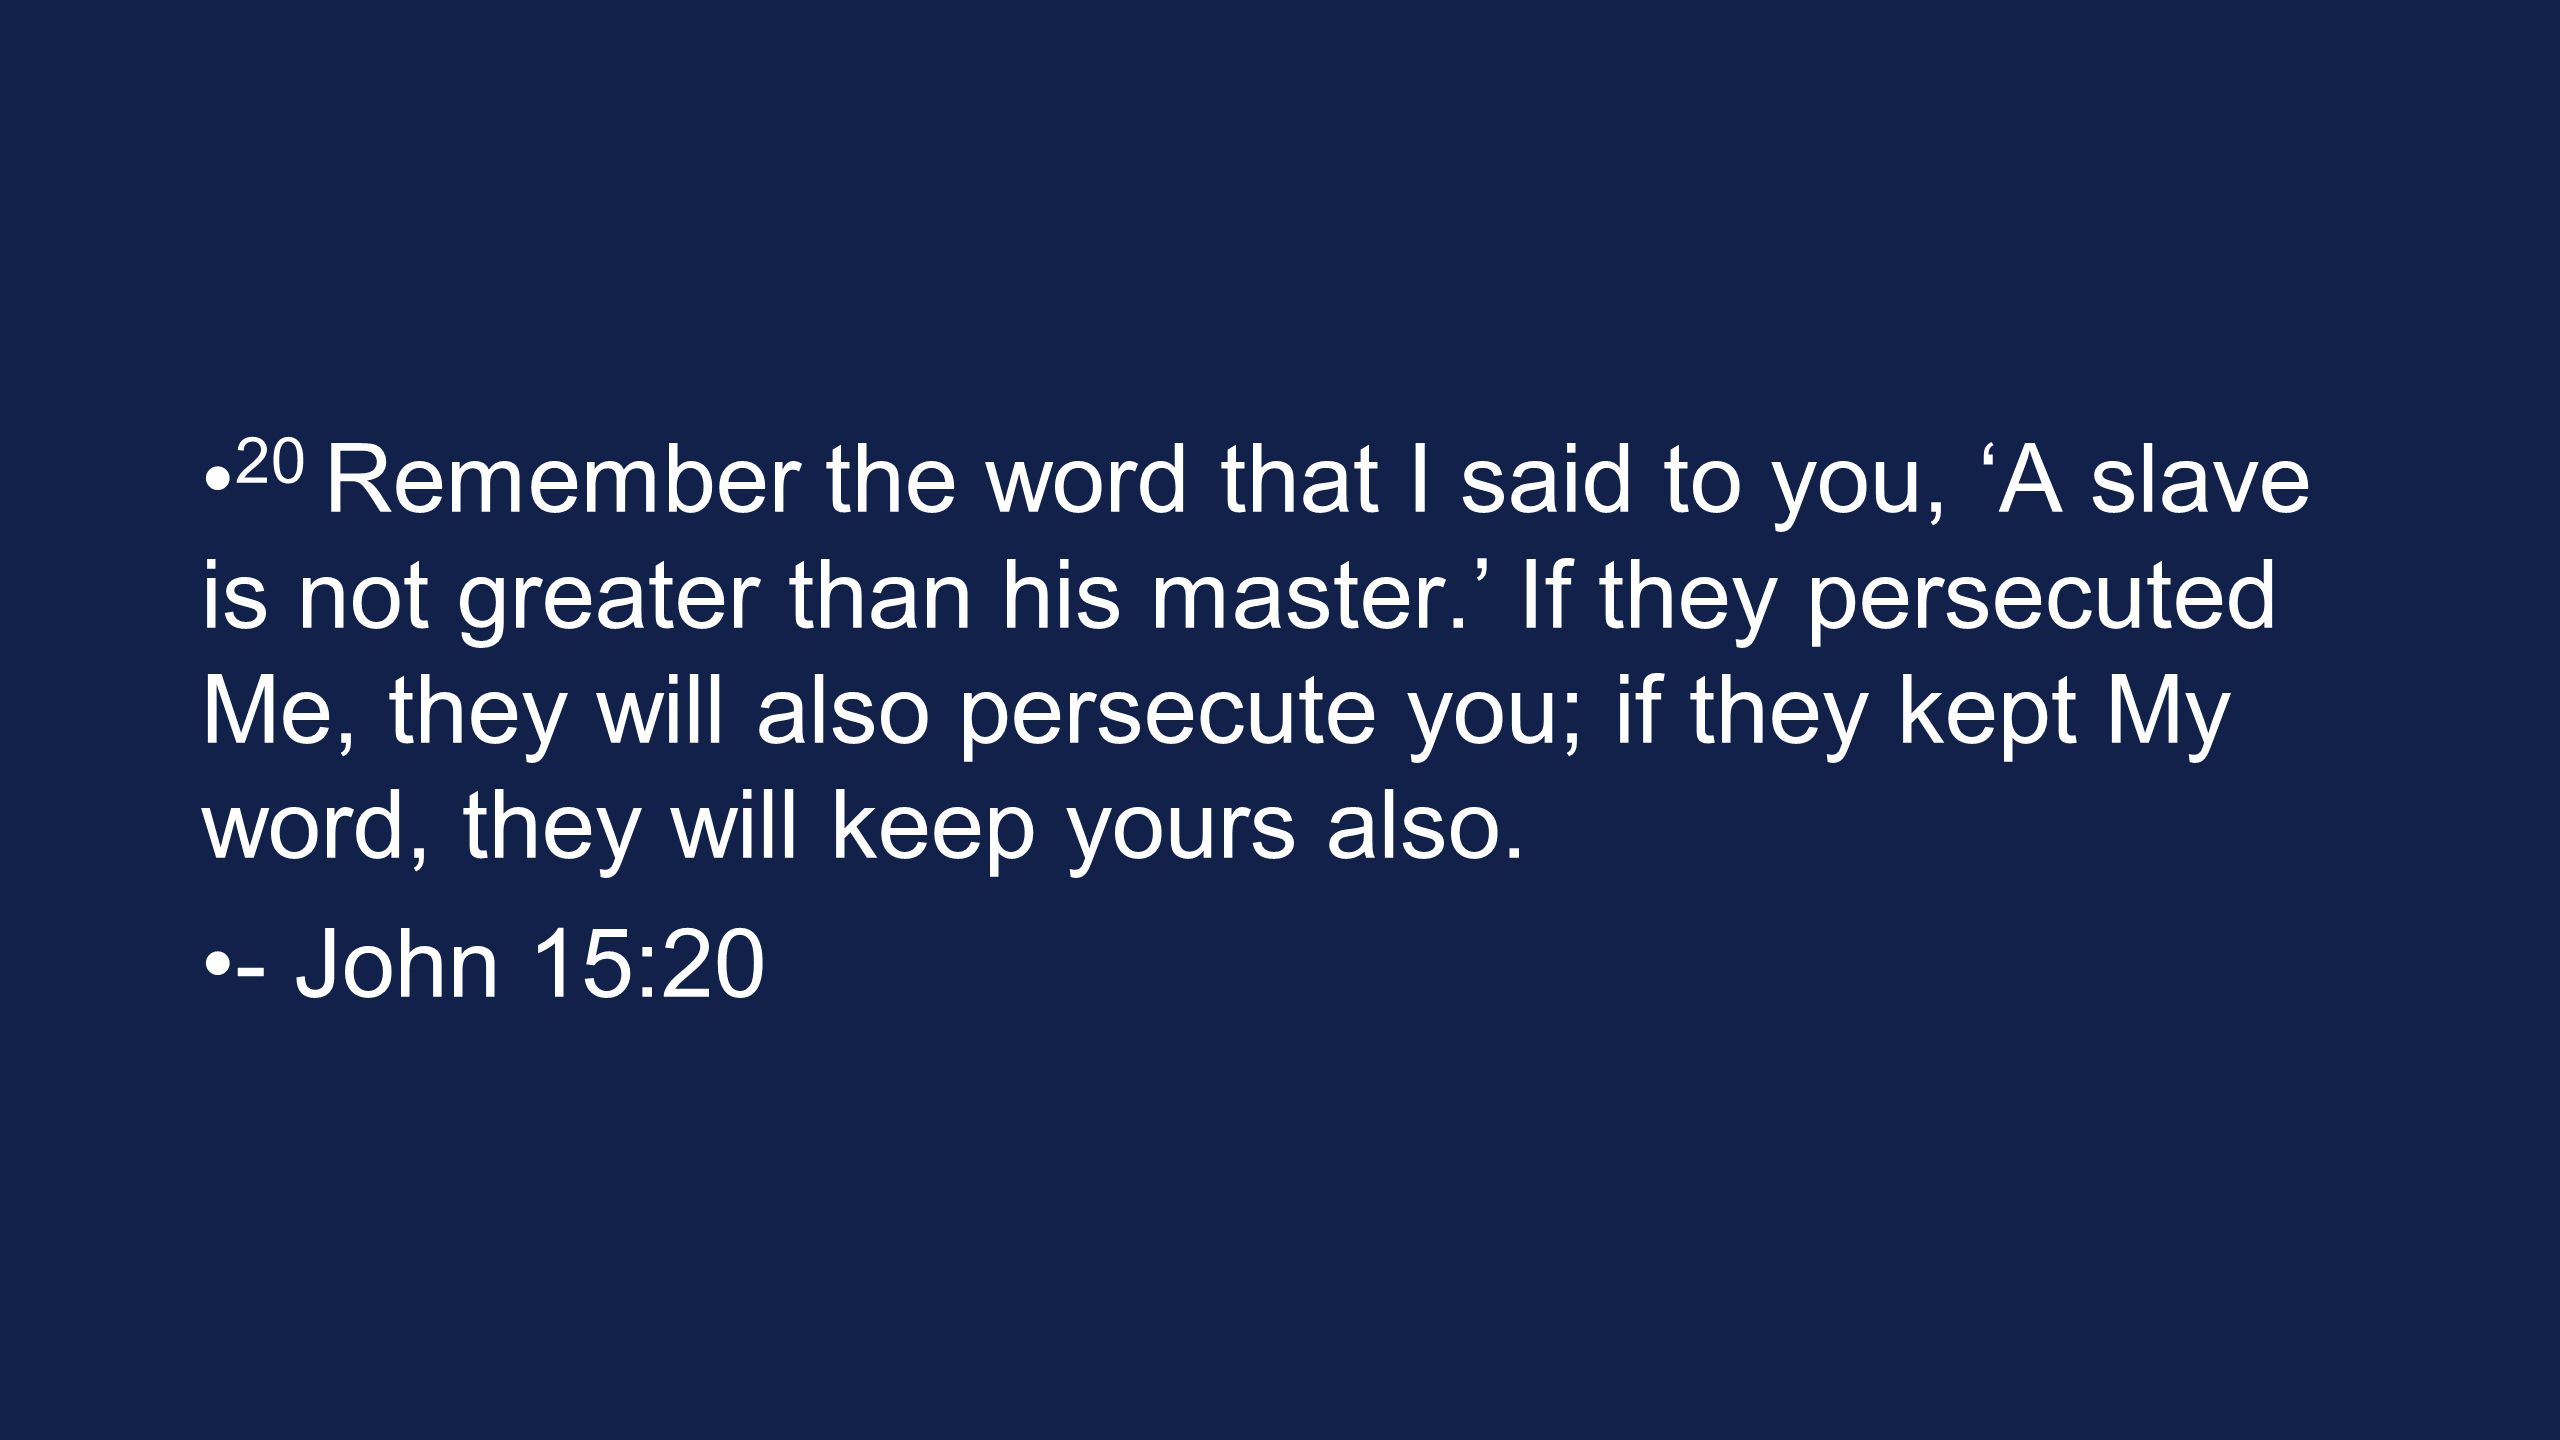 20 Remember the word that I said to you, ‘A slave is not greater than his master.’ If they persecuted Me, they will also persecute you; if they kept My word, they will keep yours also.